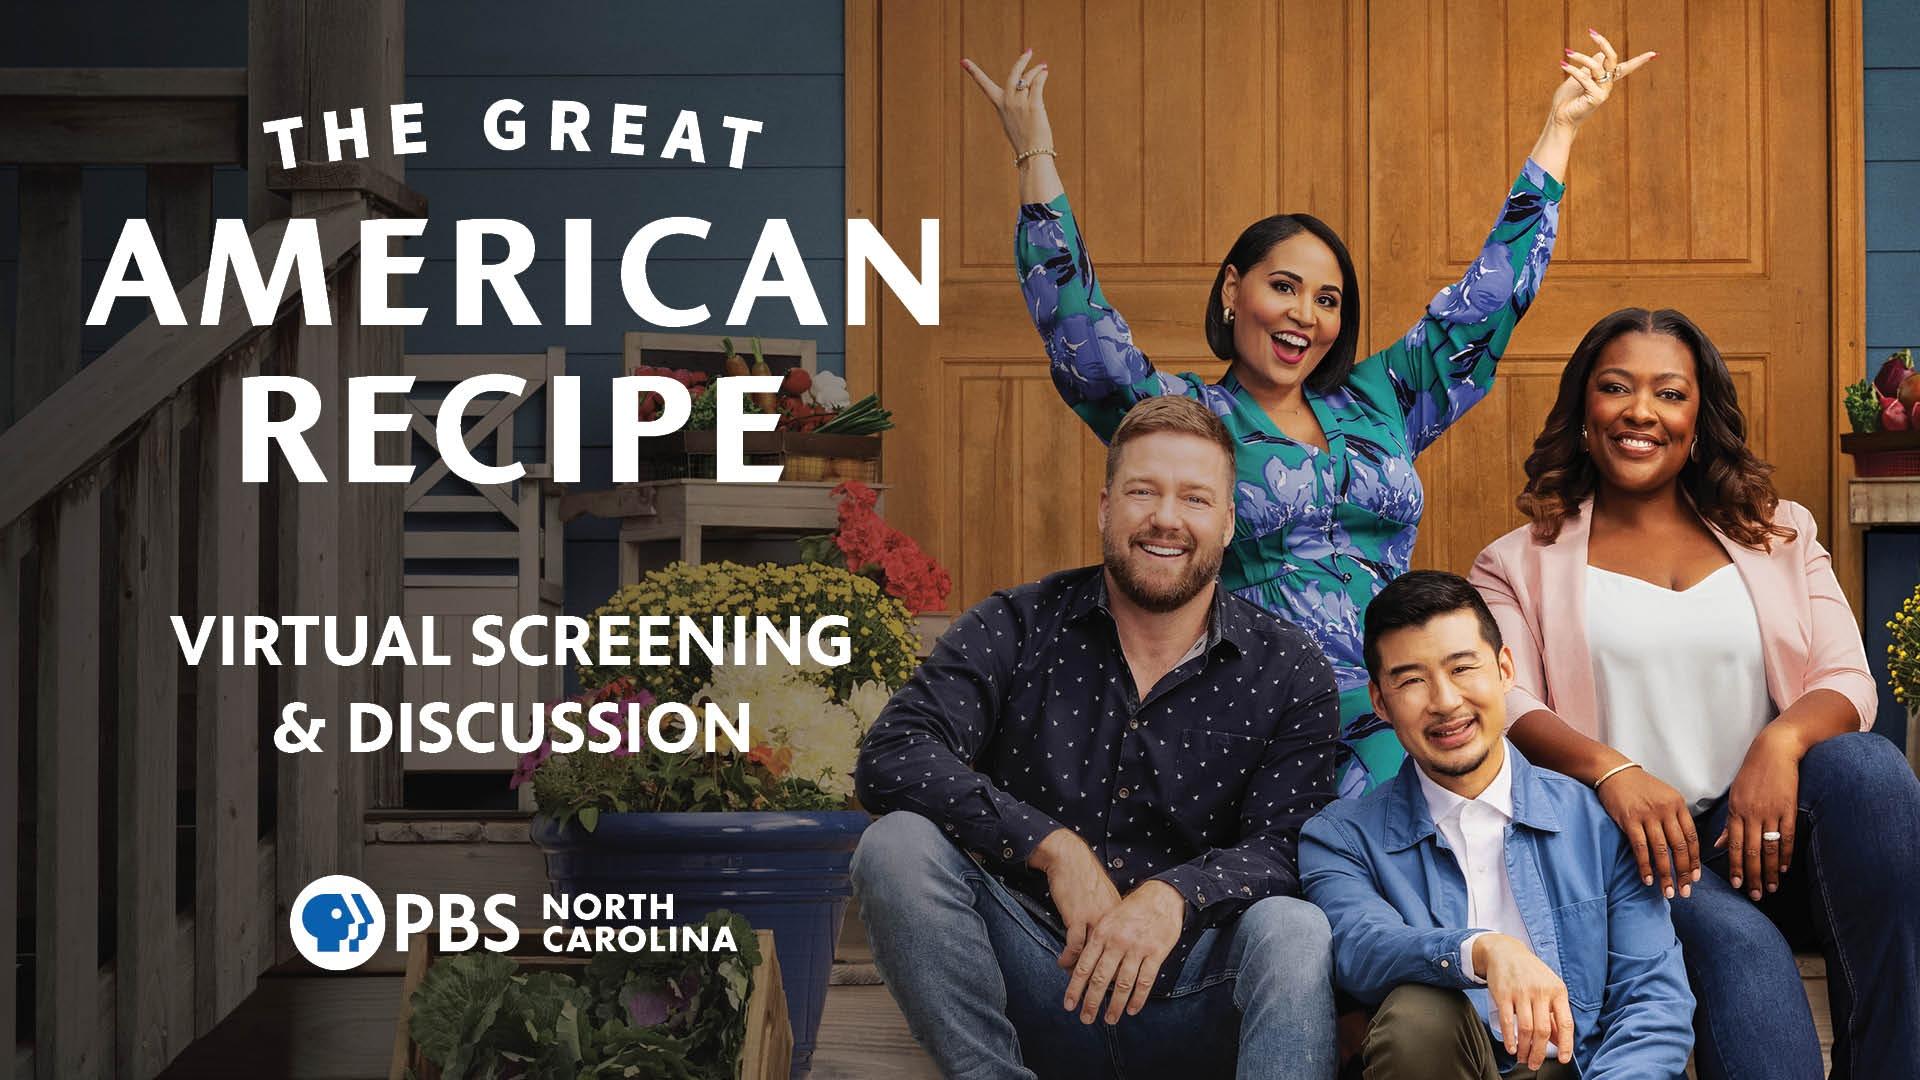 The Great American Recipe Virtual Screening & Discussion presented by PBS North Carolina.